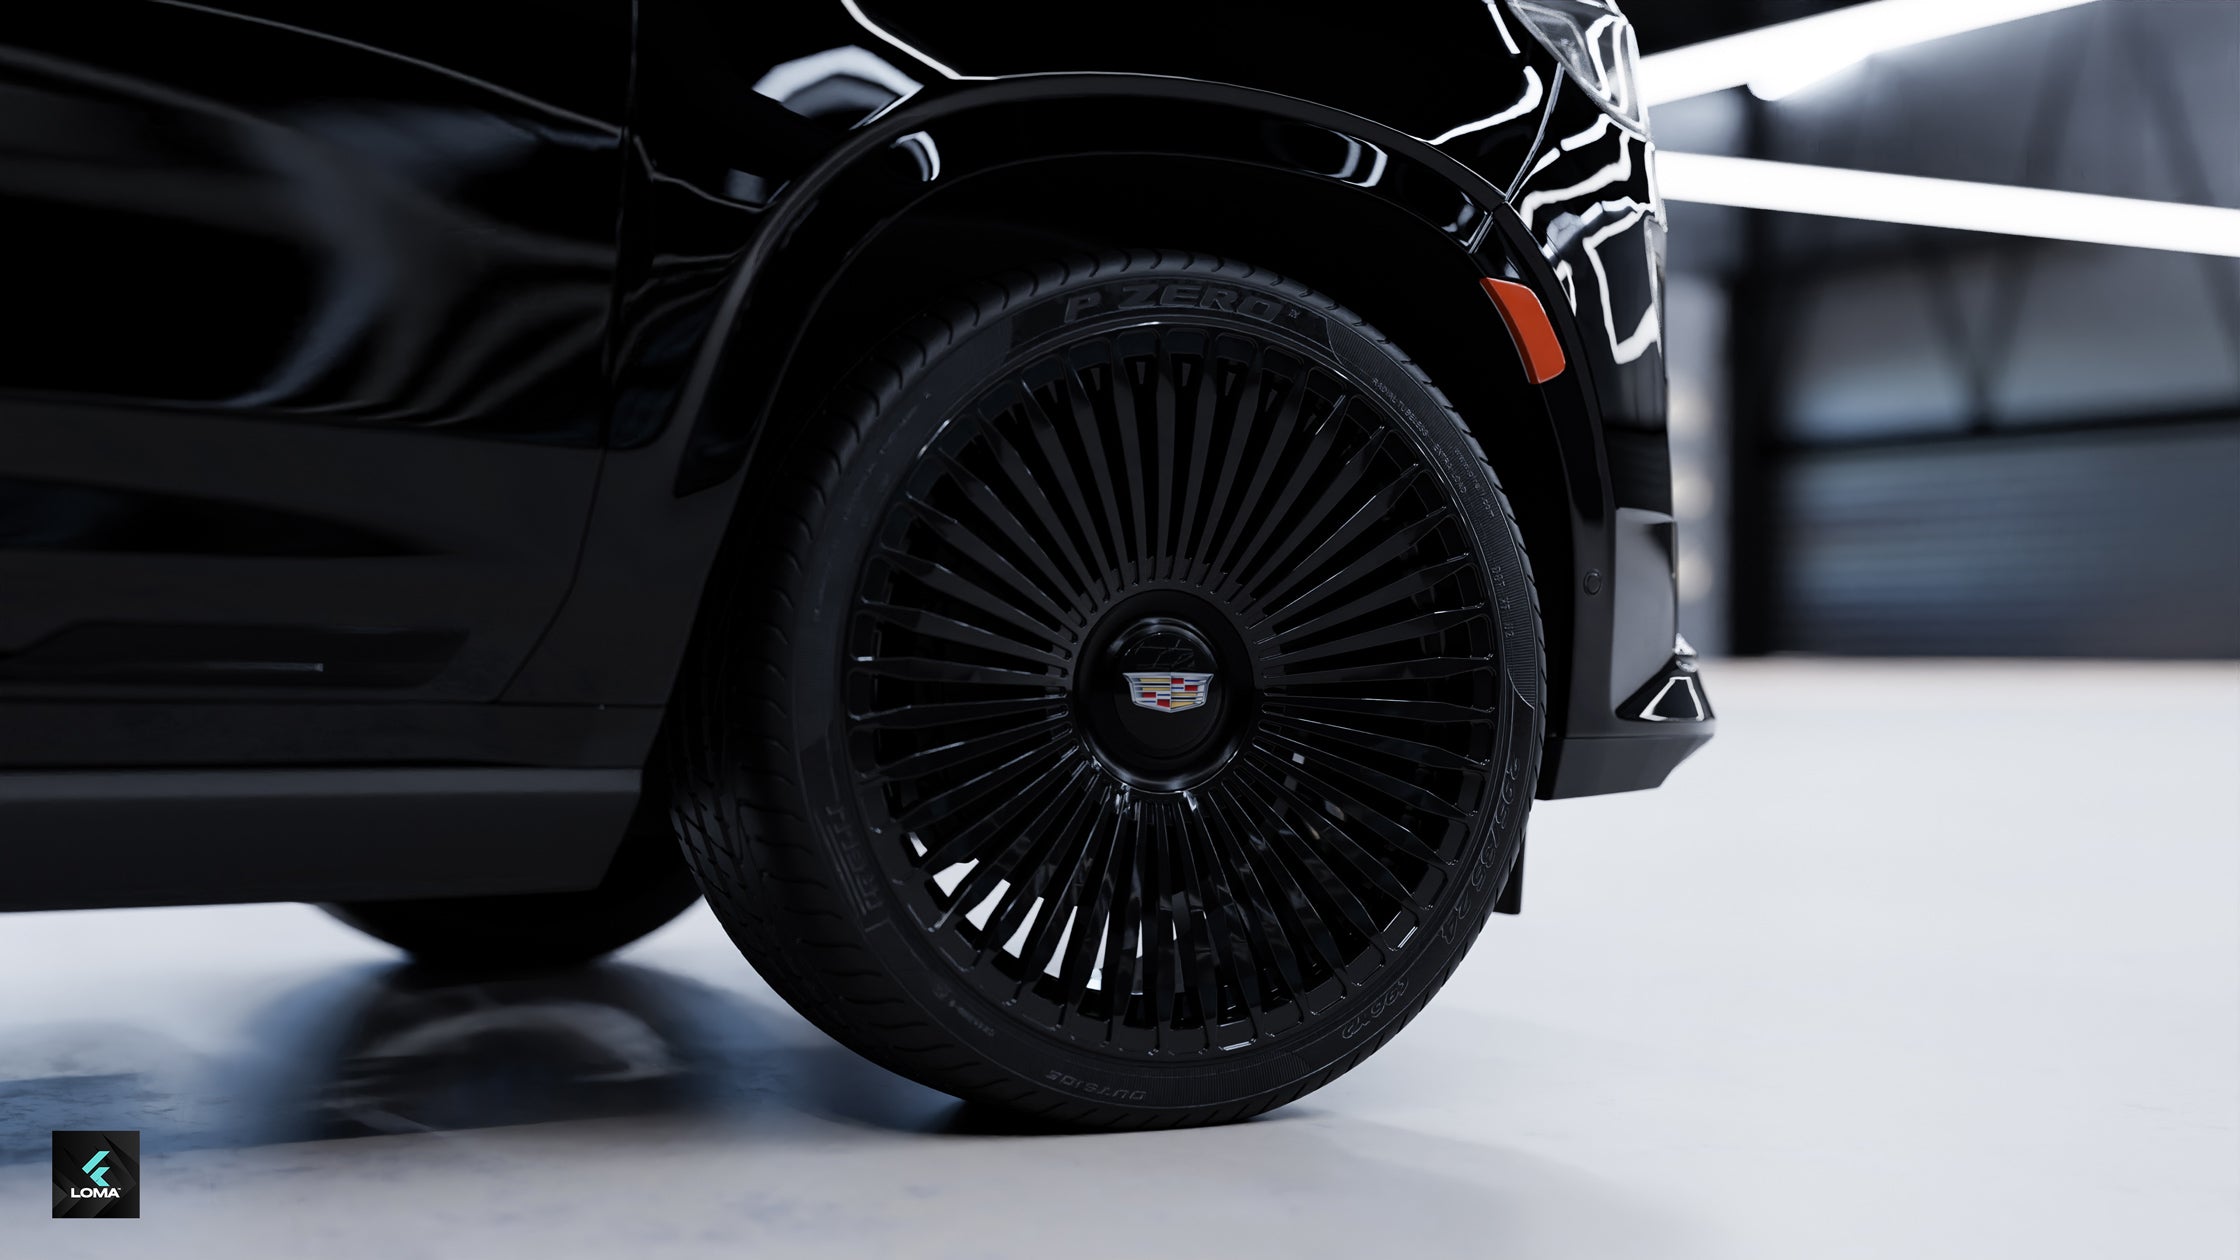 2023-Cadillac-Escalade-with-LOMA-Forged-Specter-Custom-Wheels-24-Inch-rims-11